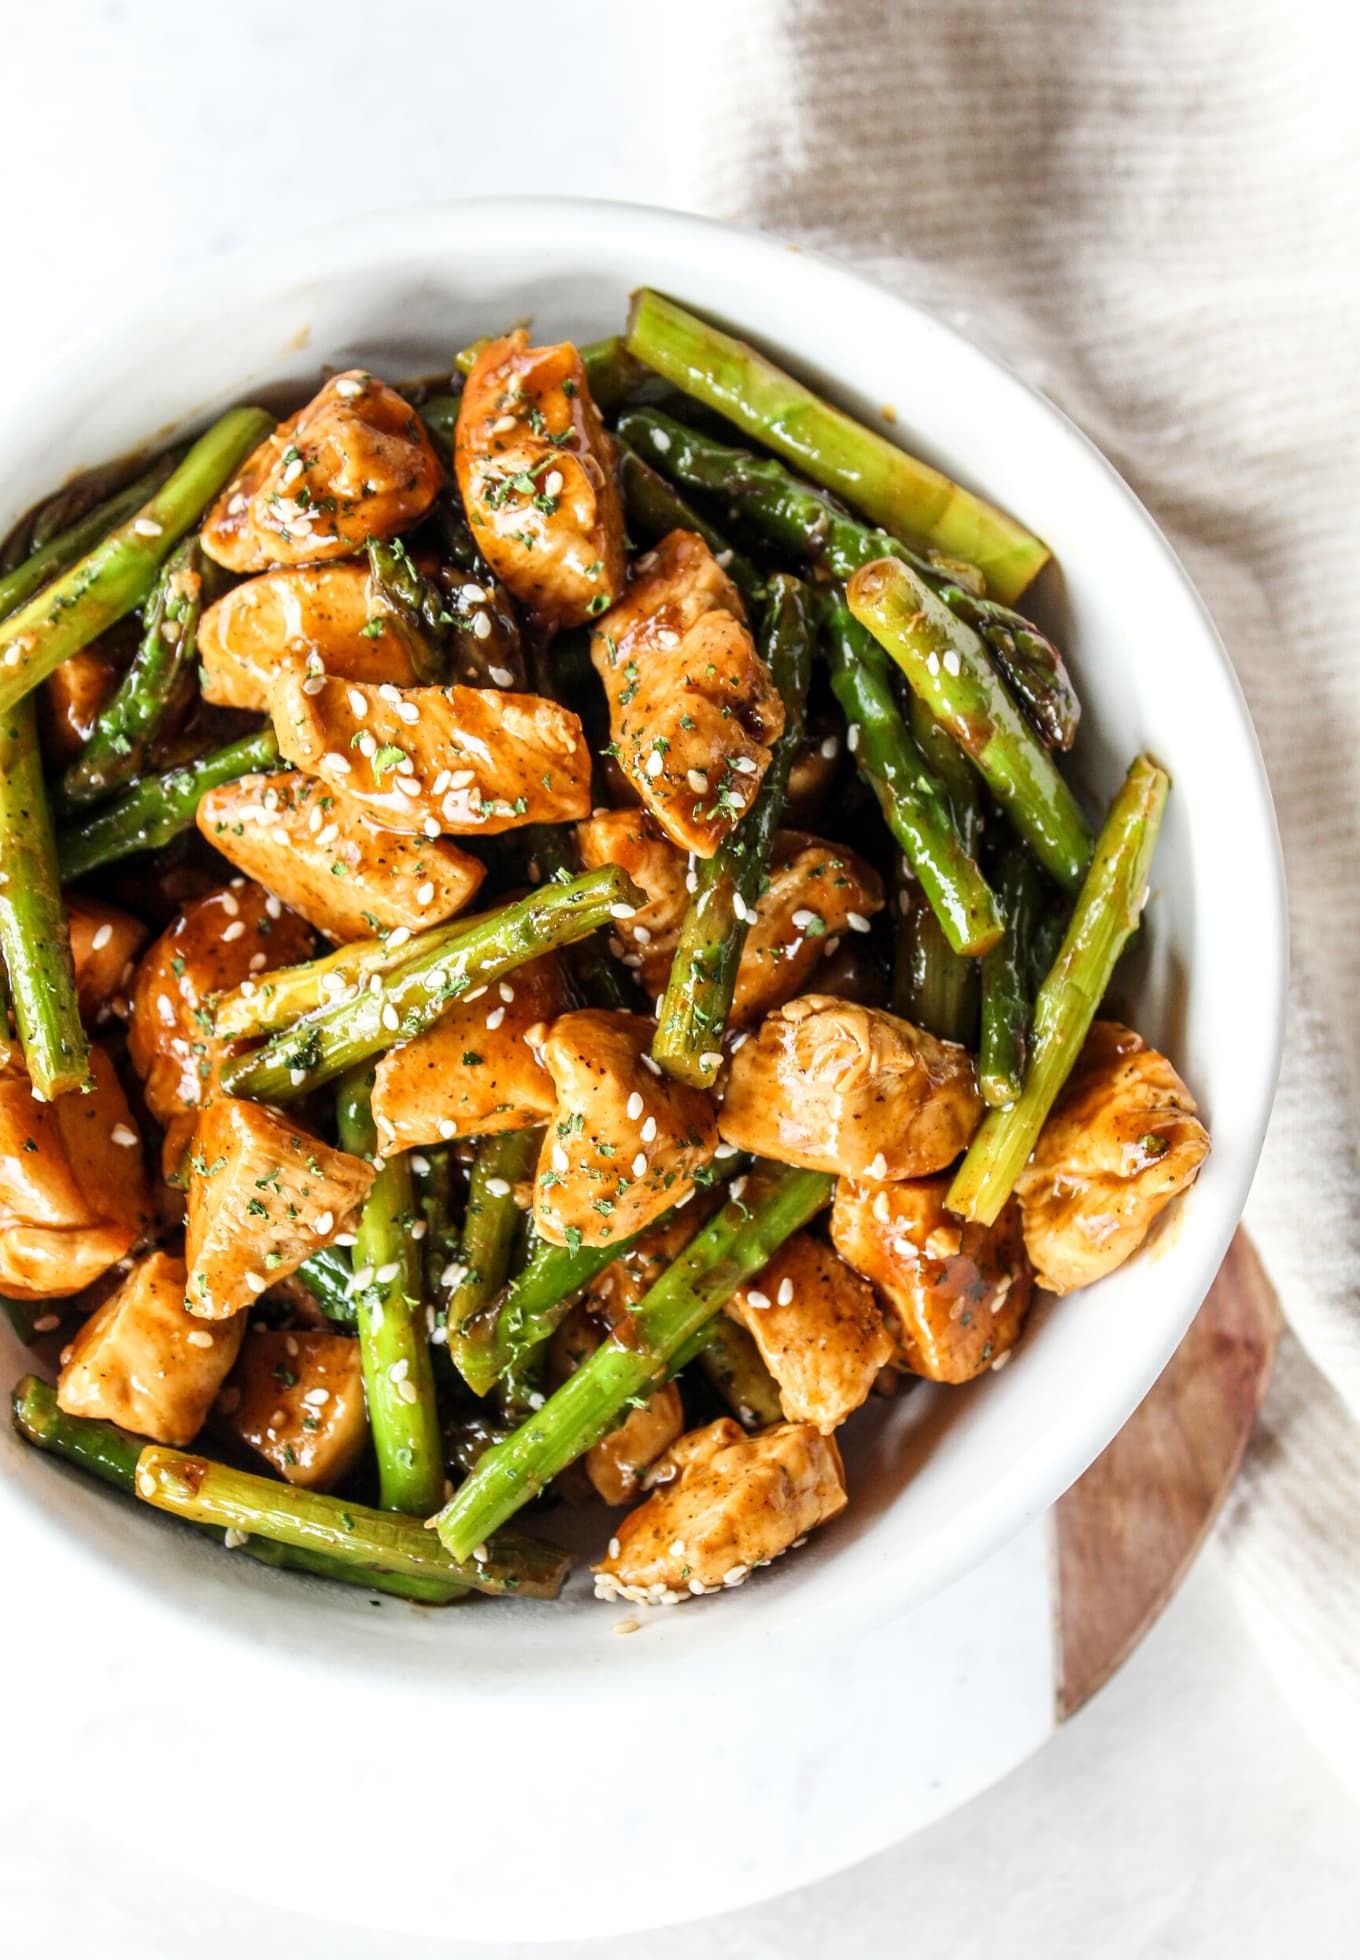 Chicken-Asparagus-Stir-Fry-by-The-Whole-Cook-vertical - The Whole Cook